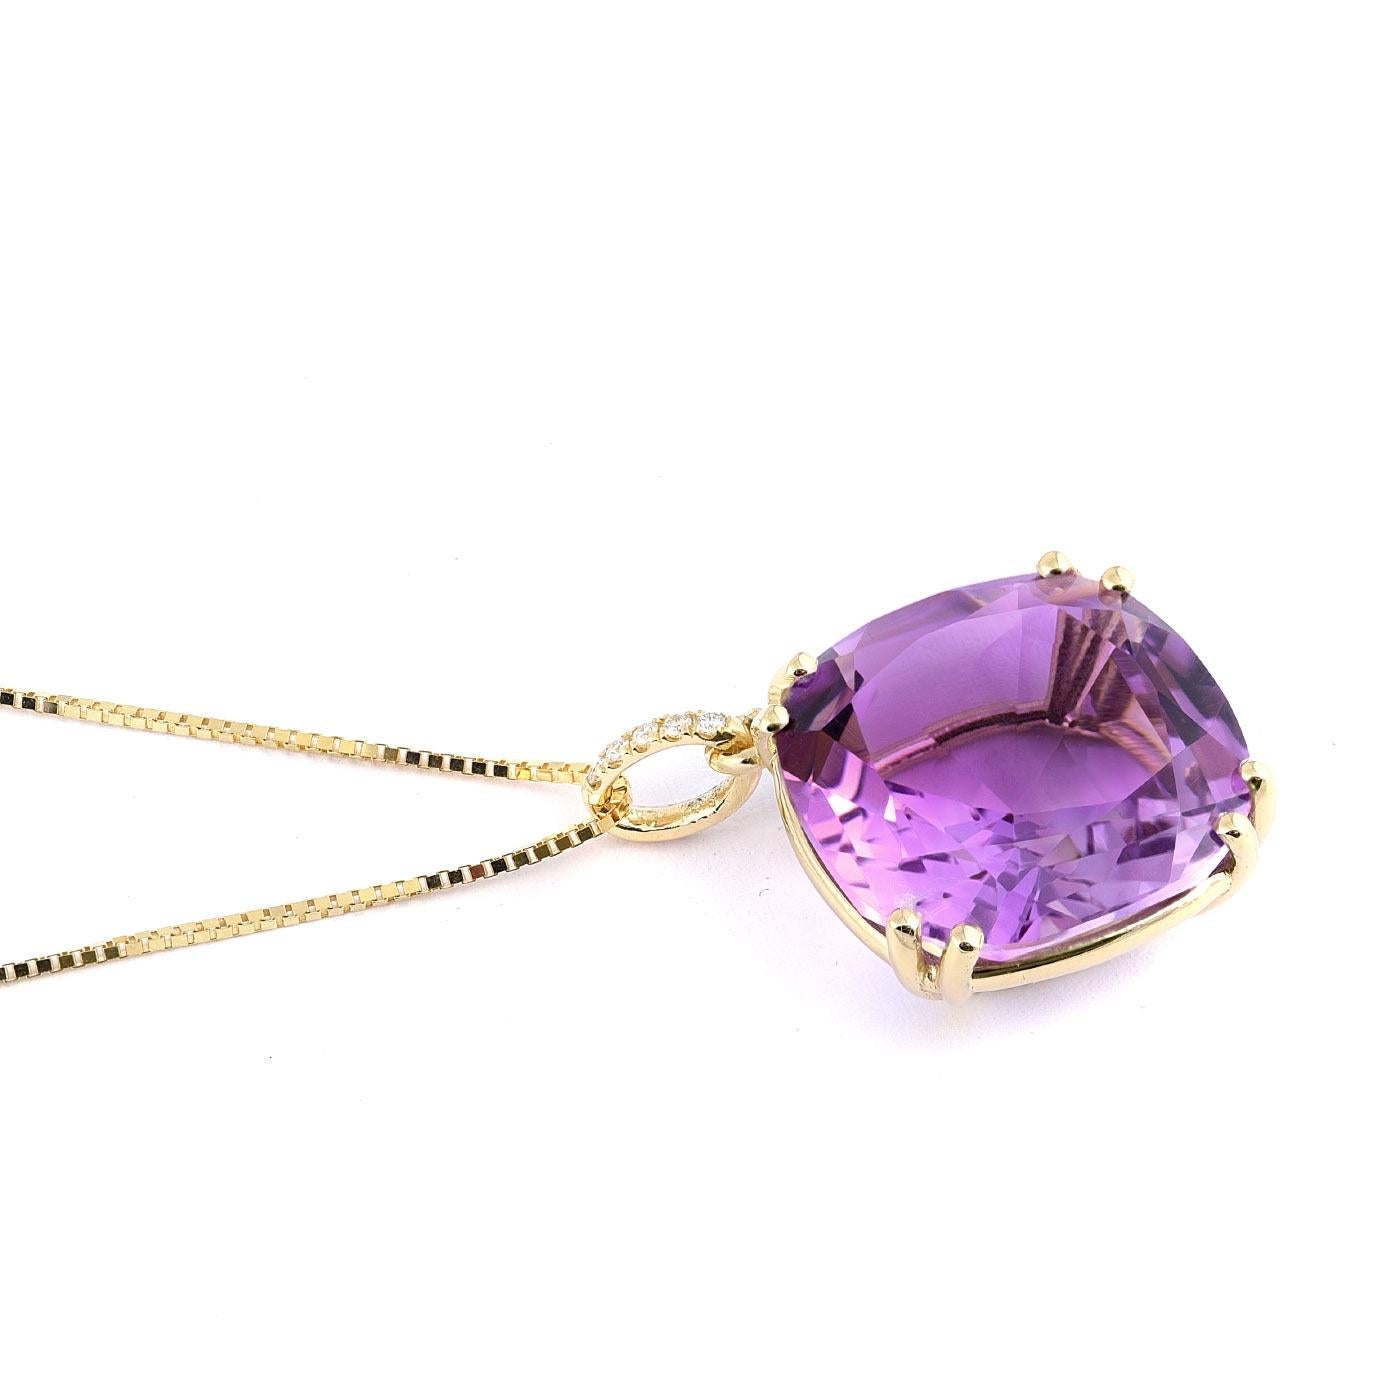 Set in 14K Yellow Gold, here is a pendant that offers a pop of versatile color with its amethyst and boasts easy to pair design that could make a statement with any outfit. At 17.69 carats, this evenly cut cushion also has an attractive even tone